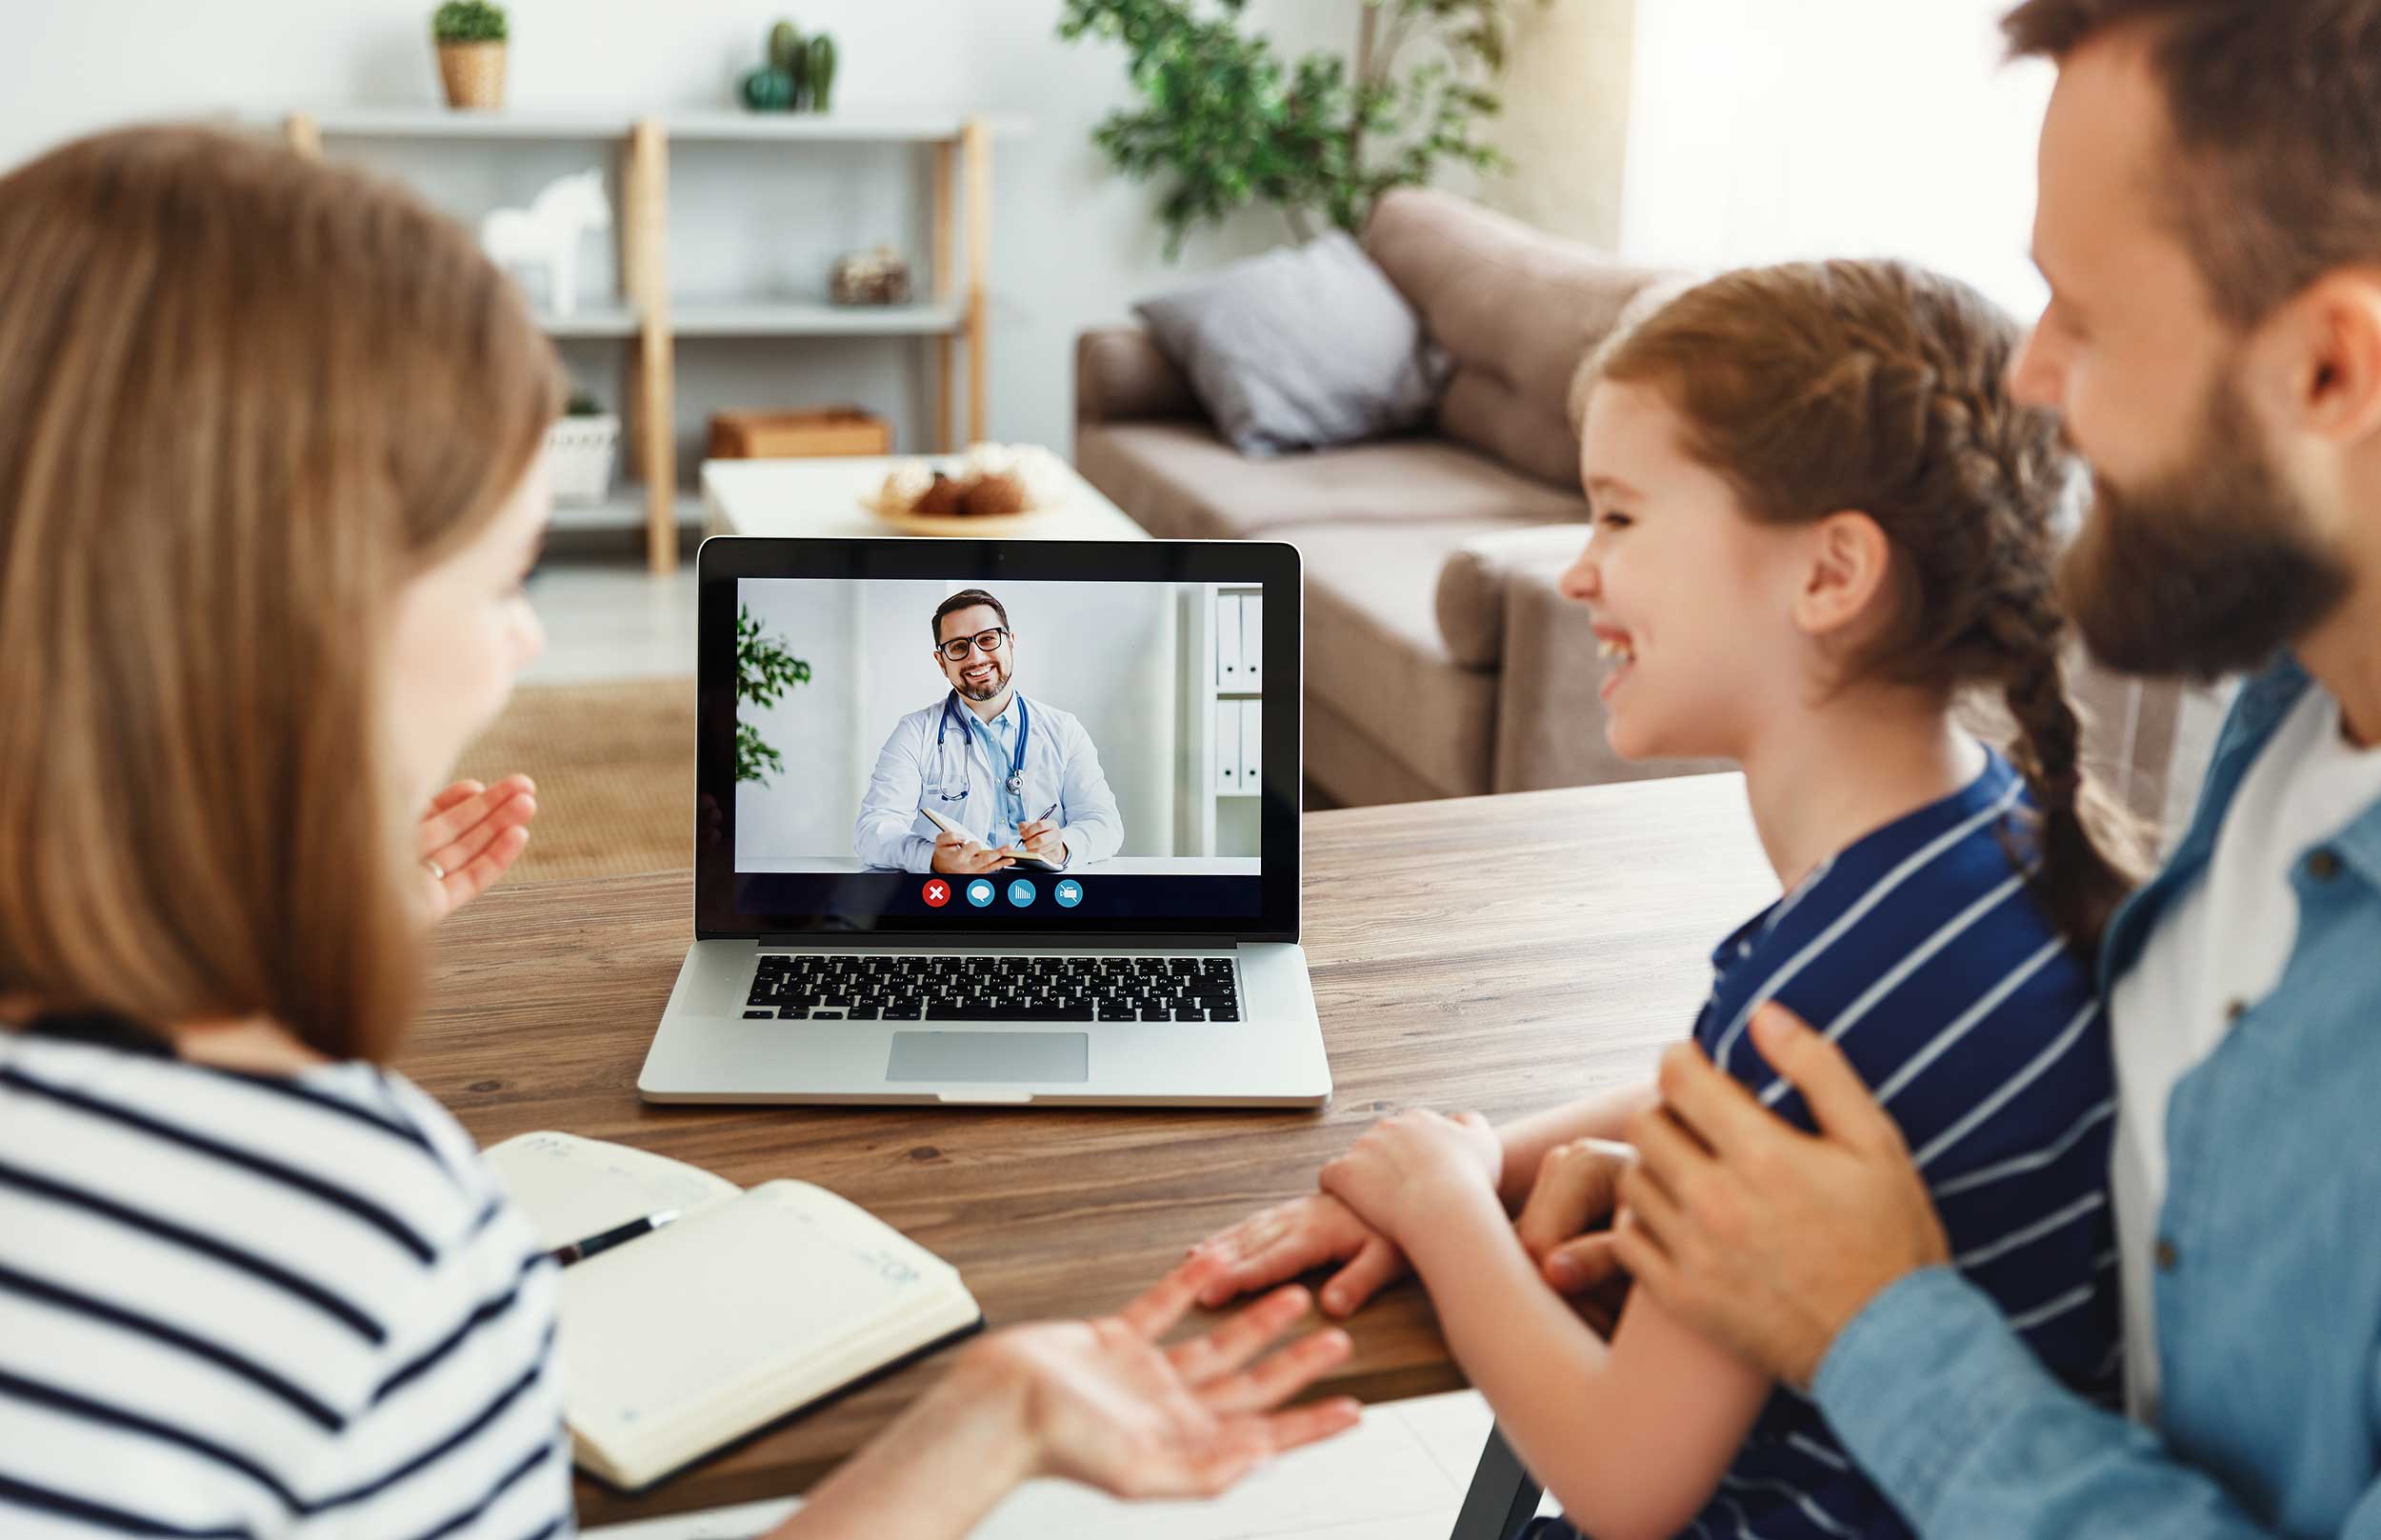 Family gathered around a laptop for a telehealth visit with their doctor